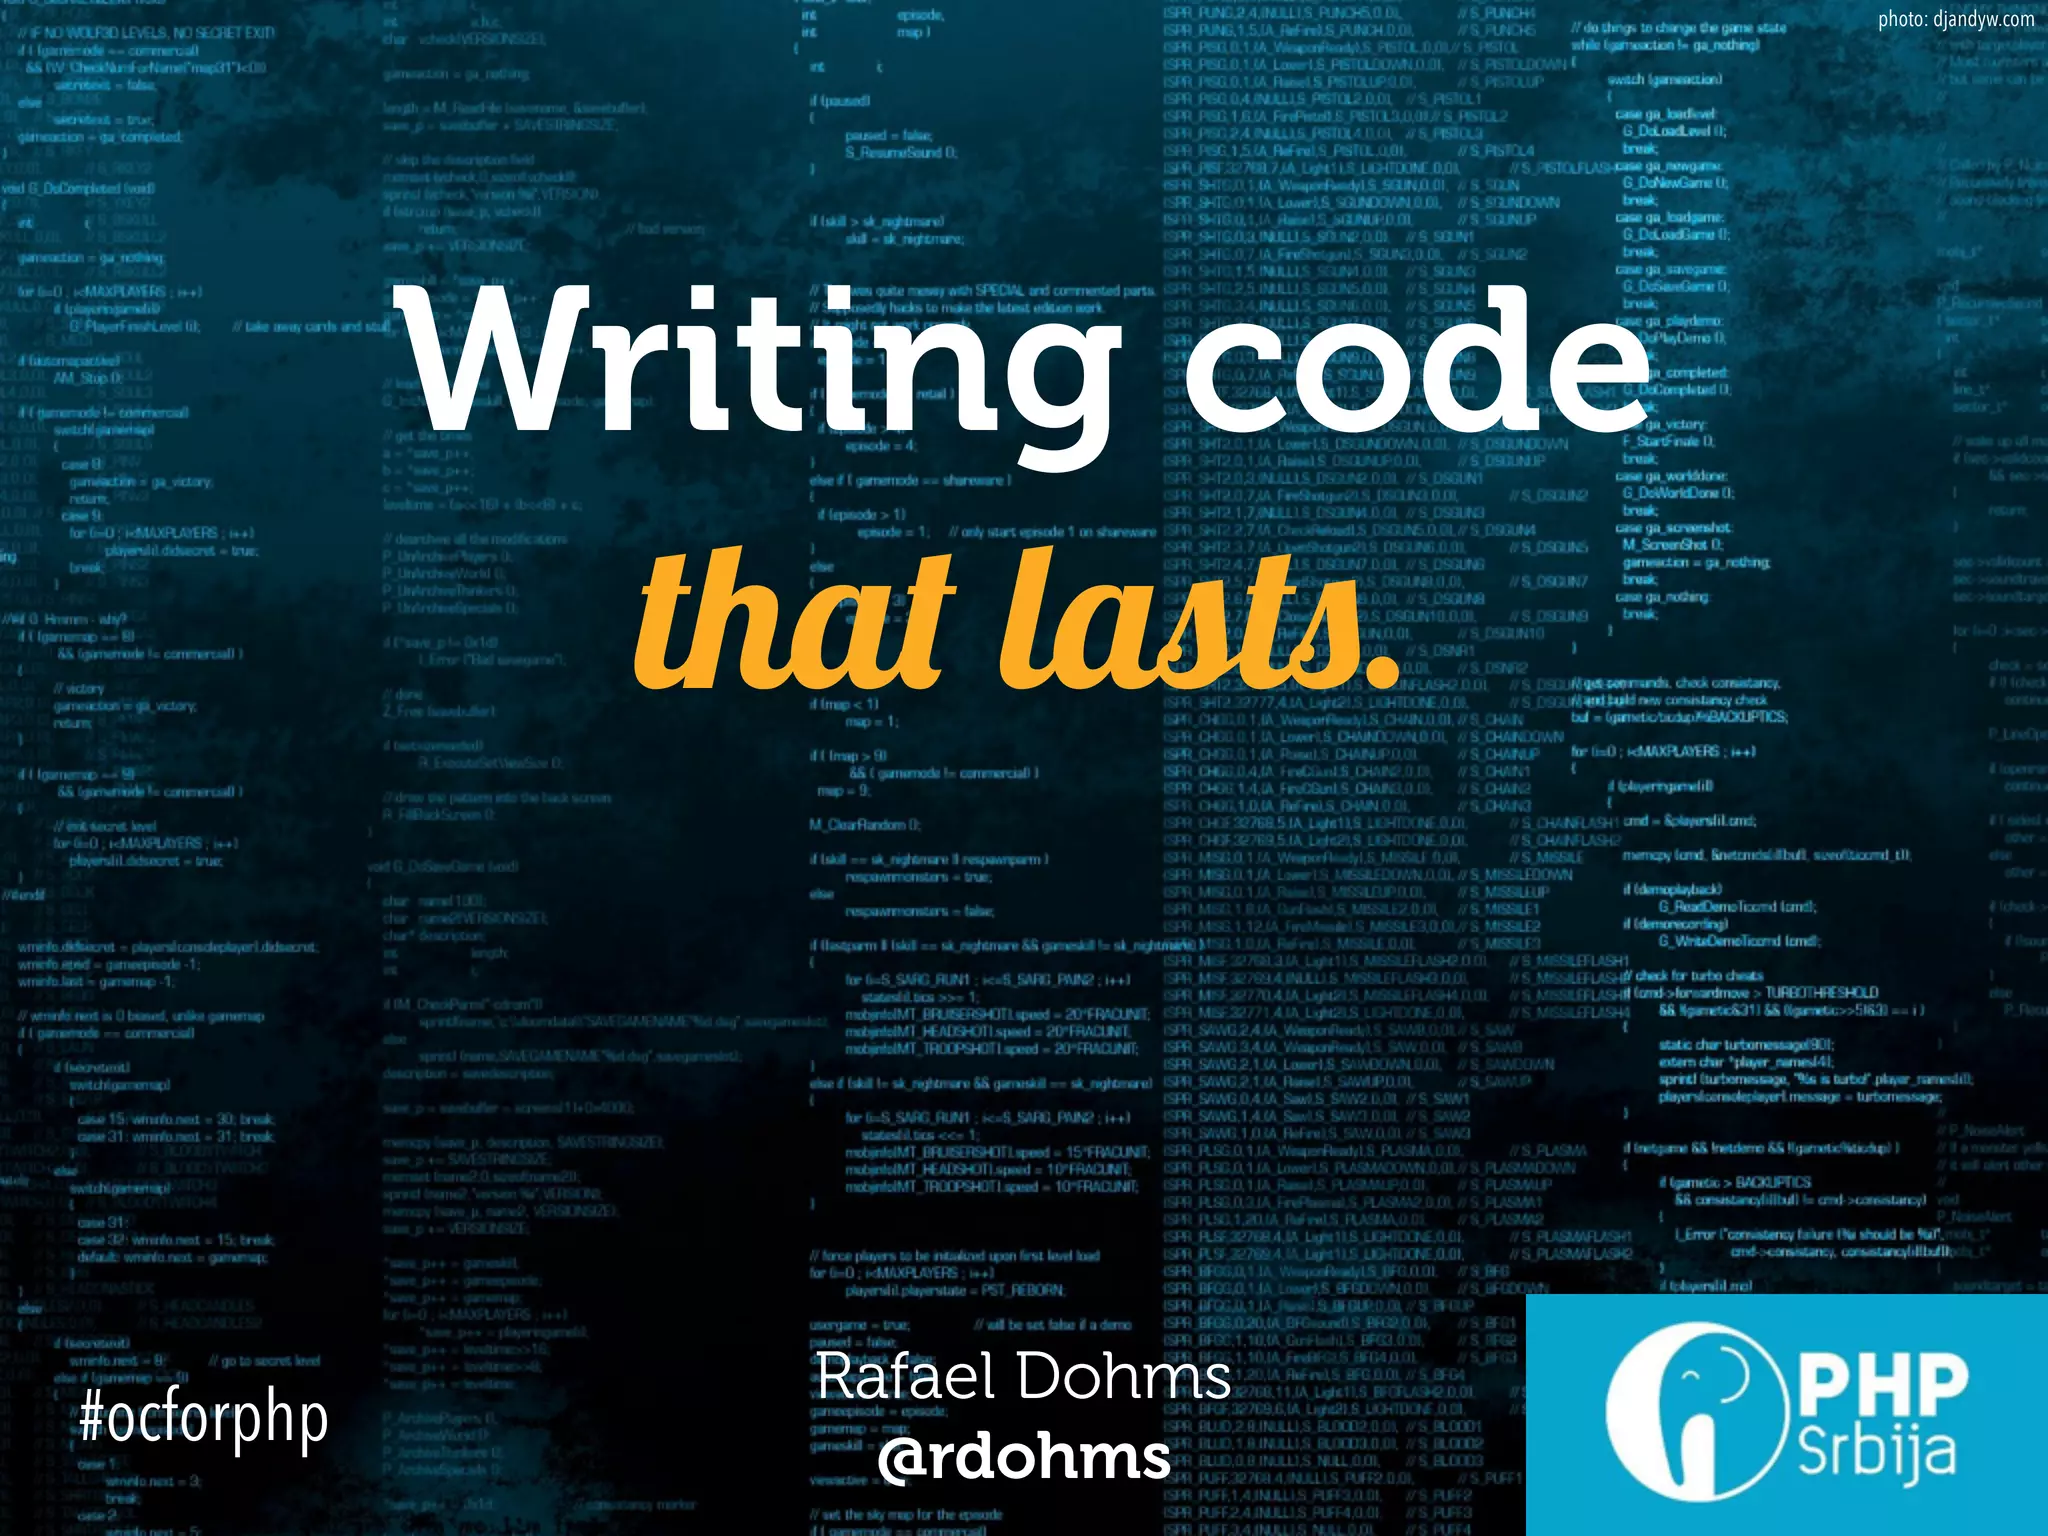 “Writing code that lasts” … or writing code you won’t hate tomorrow.